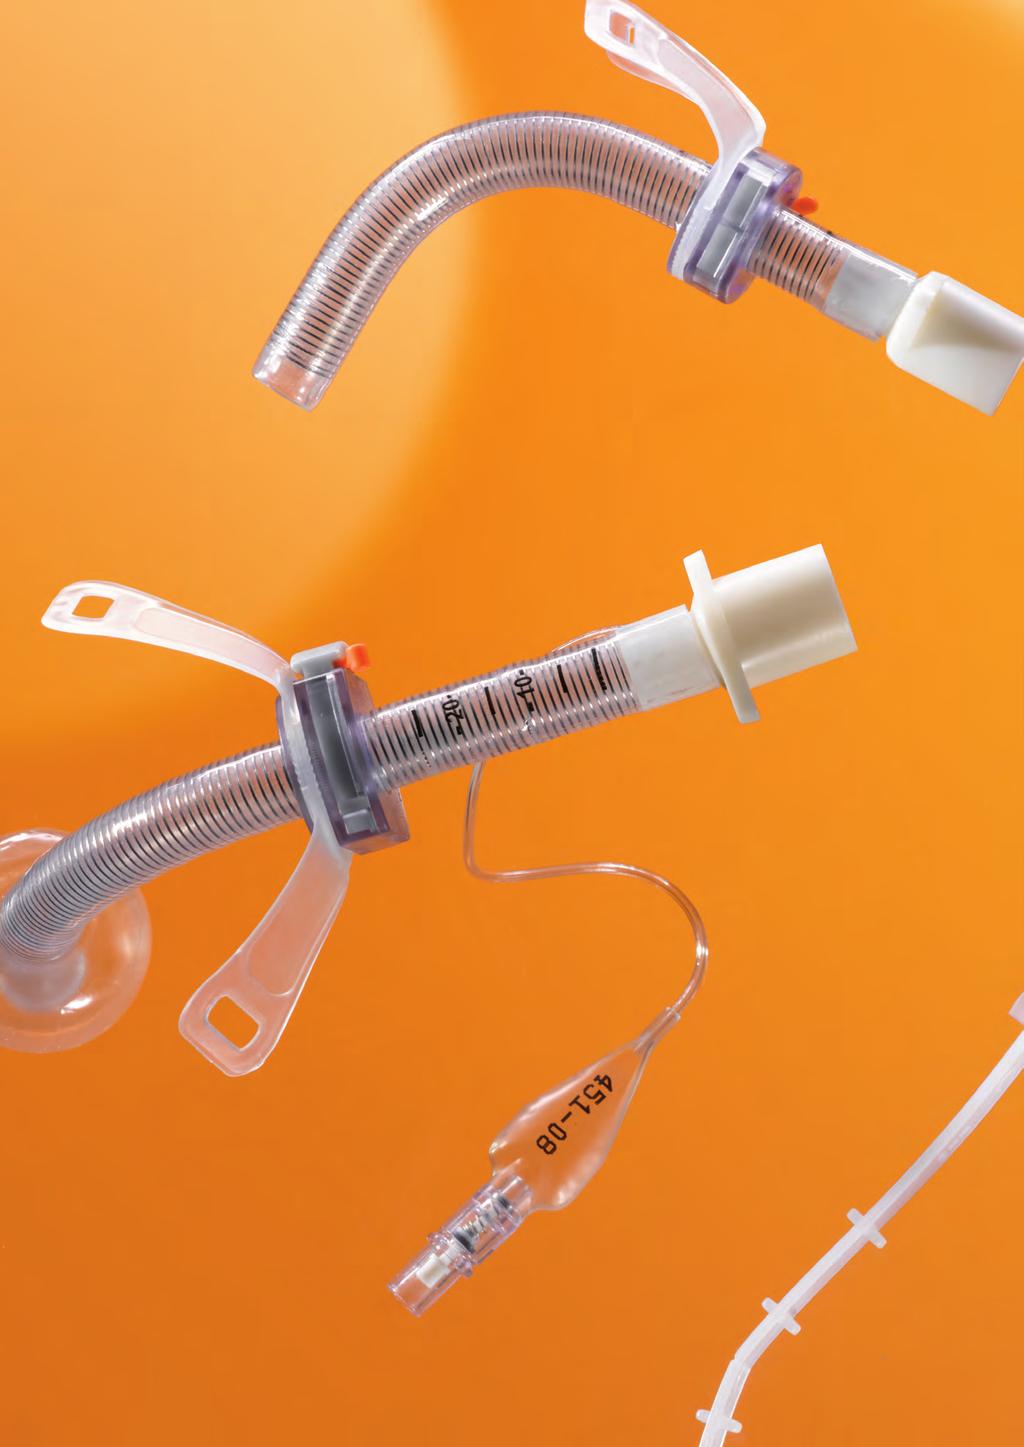 Tracoe vario Tracheostomy Tubes Key features Adjustable Tracoetwist neck flange range allows features accurate placement and security A spring mechanism lets the flange slide easily to a new position